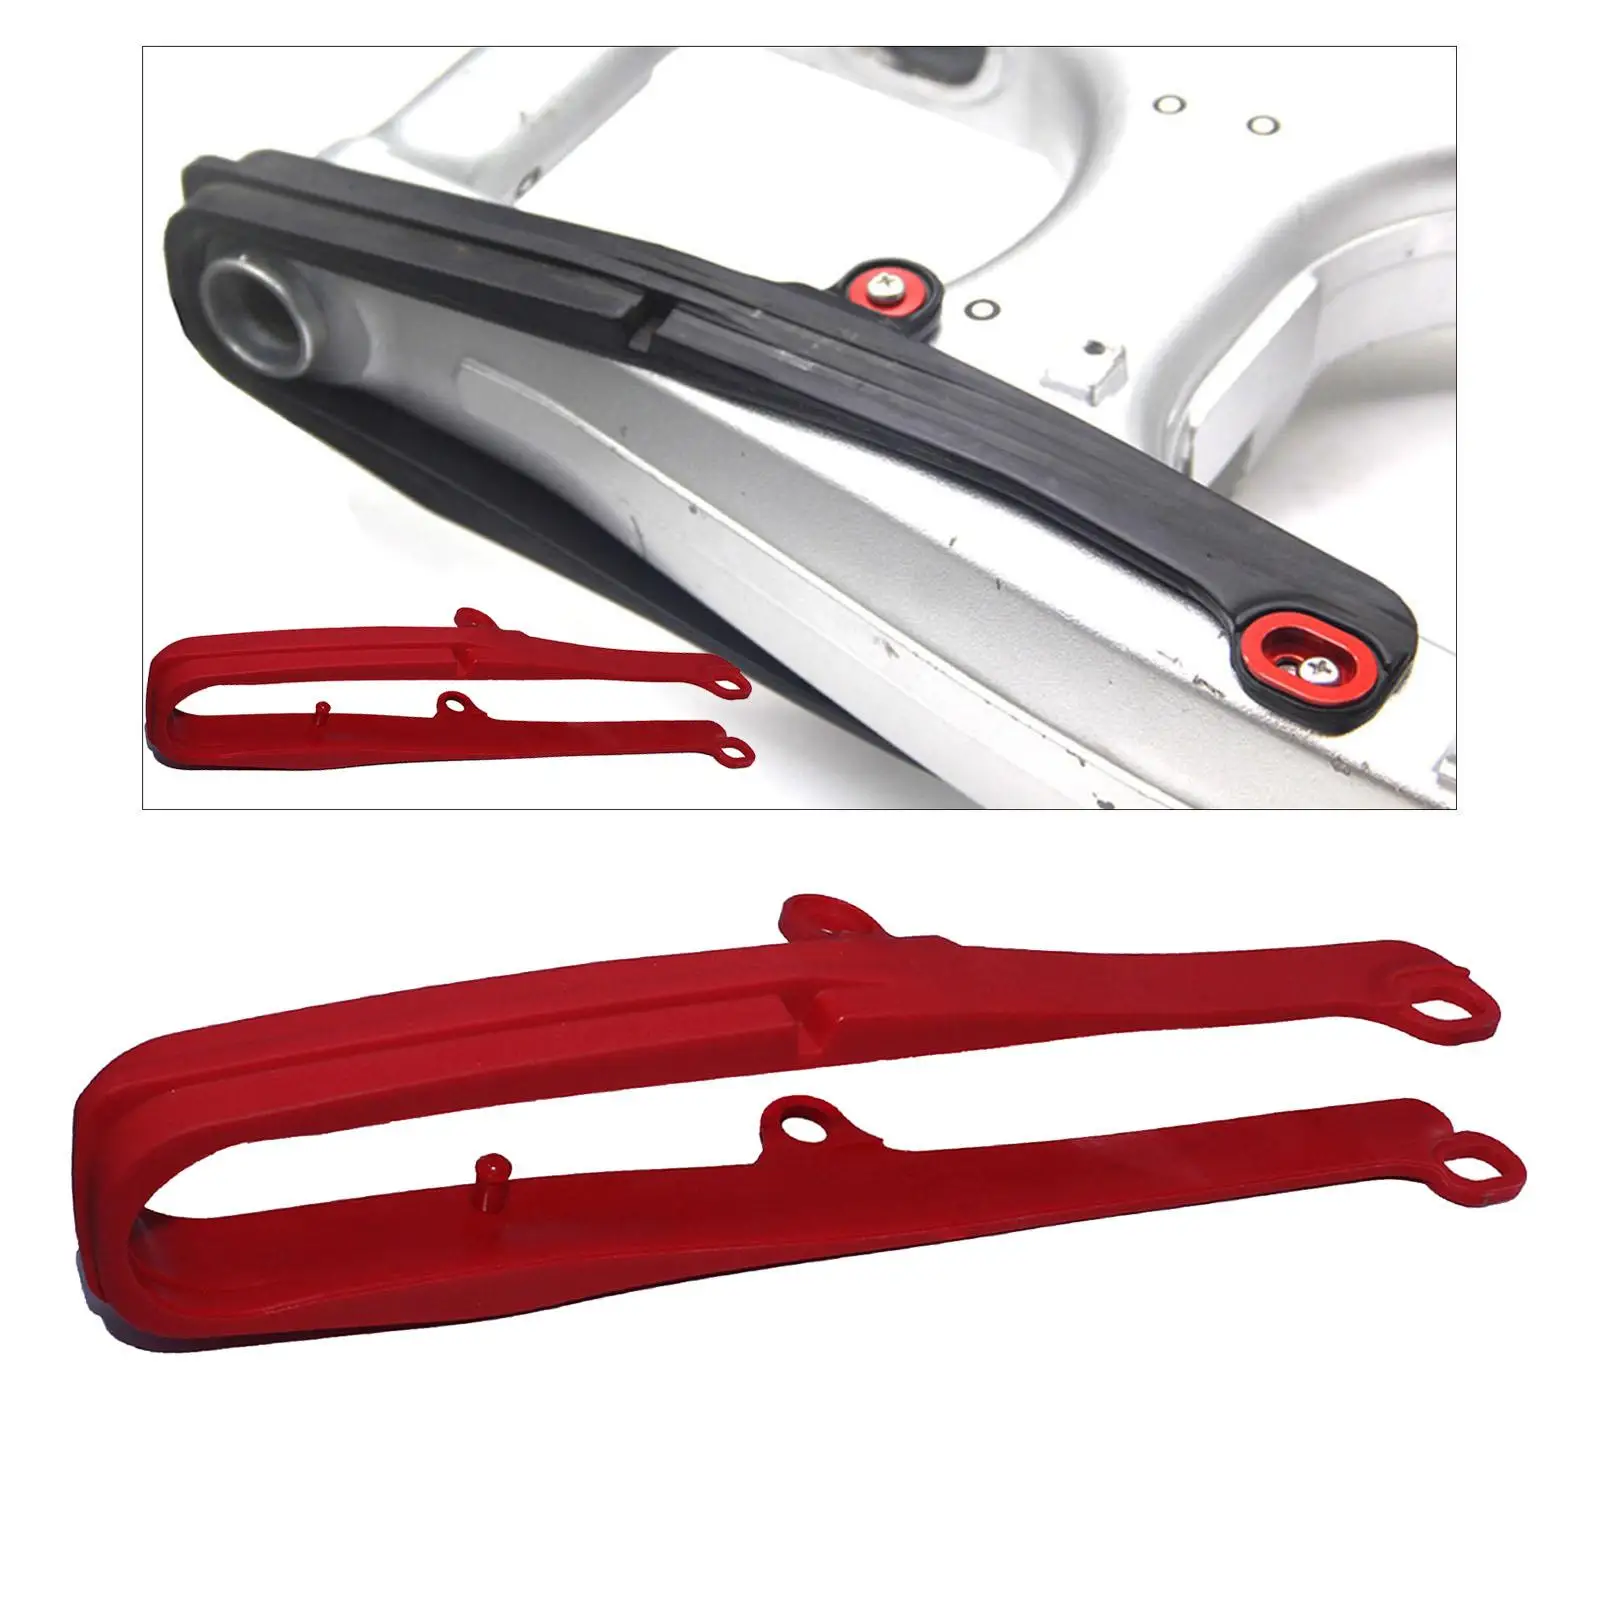 New Honda Swing Arm Rear Chain Guide Slider Chain Guide Guard for Off-road Parts HONDA CRF250L 2013-2020 CRF250RLA 2017-2020